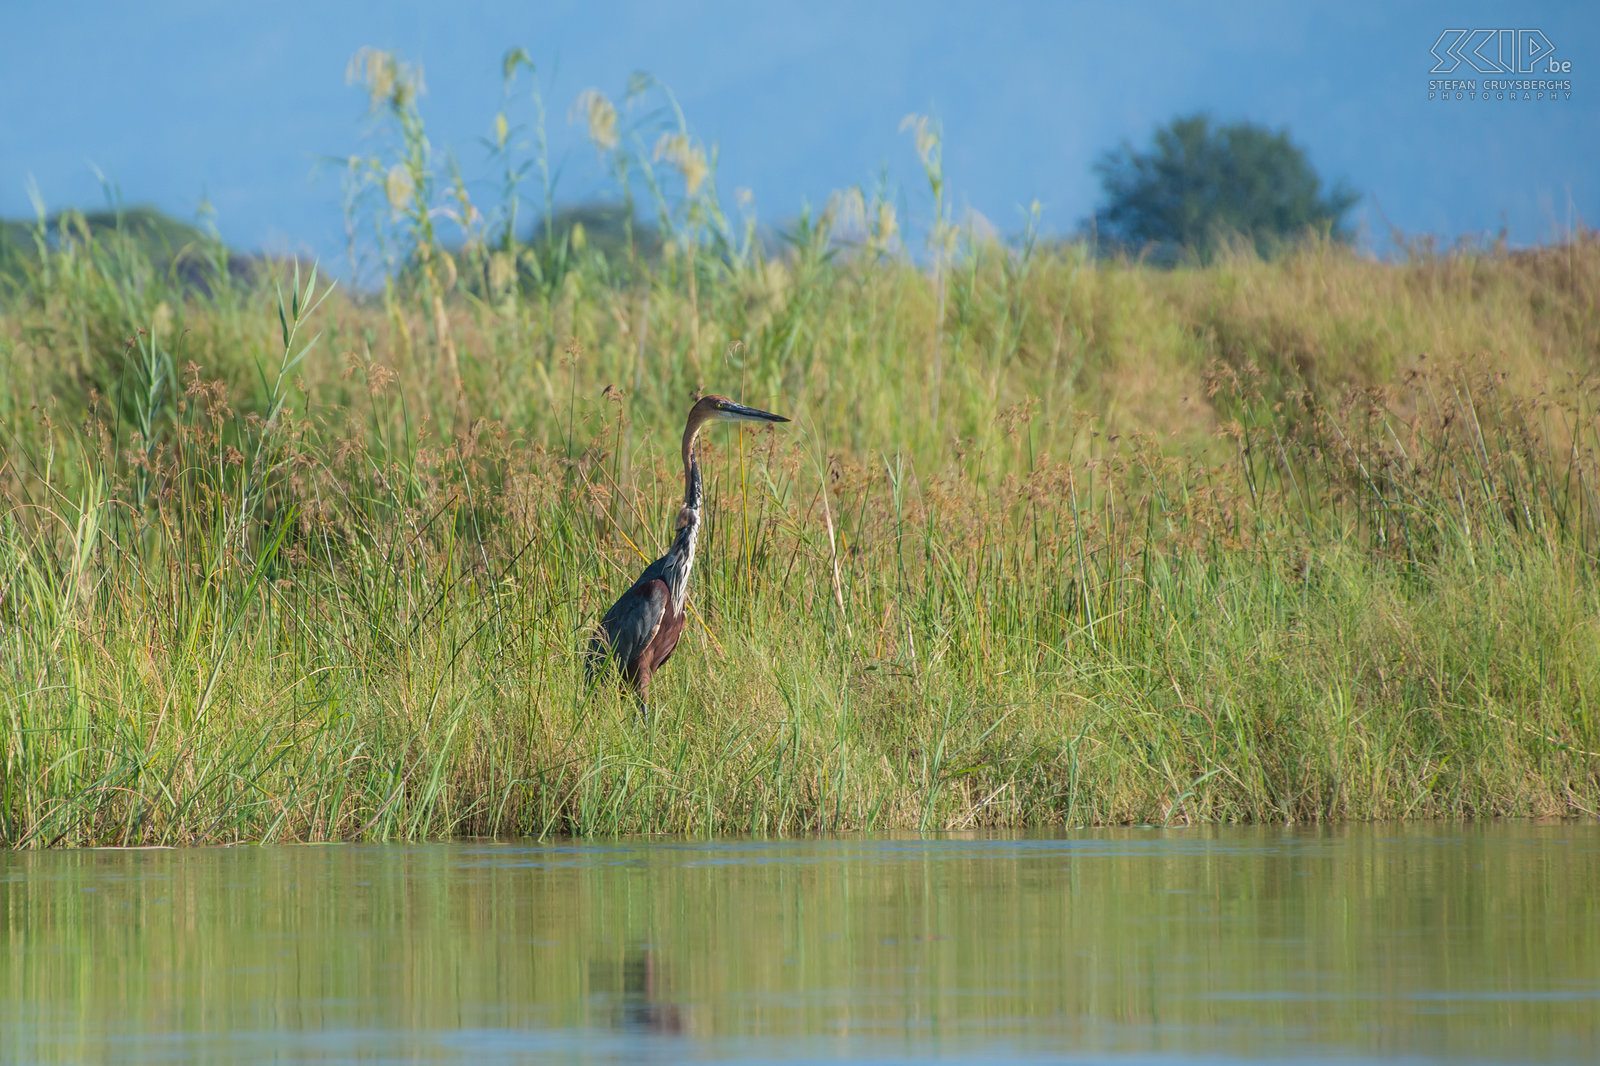 Lower Zambezi - Goliath heron The goliath heron (Ardea goliath), also known as the giant heron, is the largest heron in Africa. They are solitary foragers and very territorial. Stefan Cruysberghs